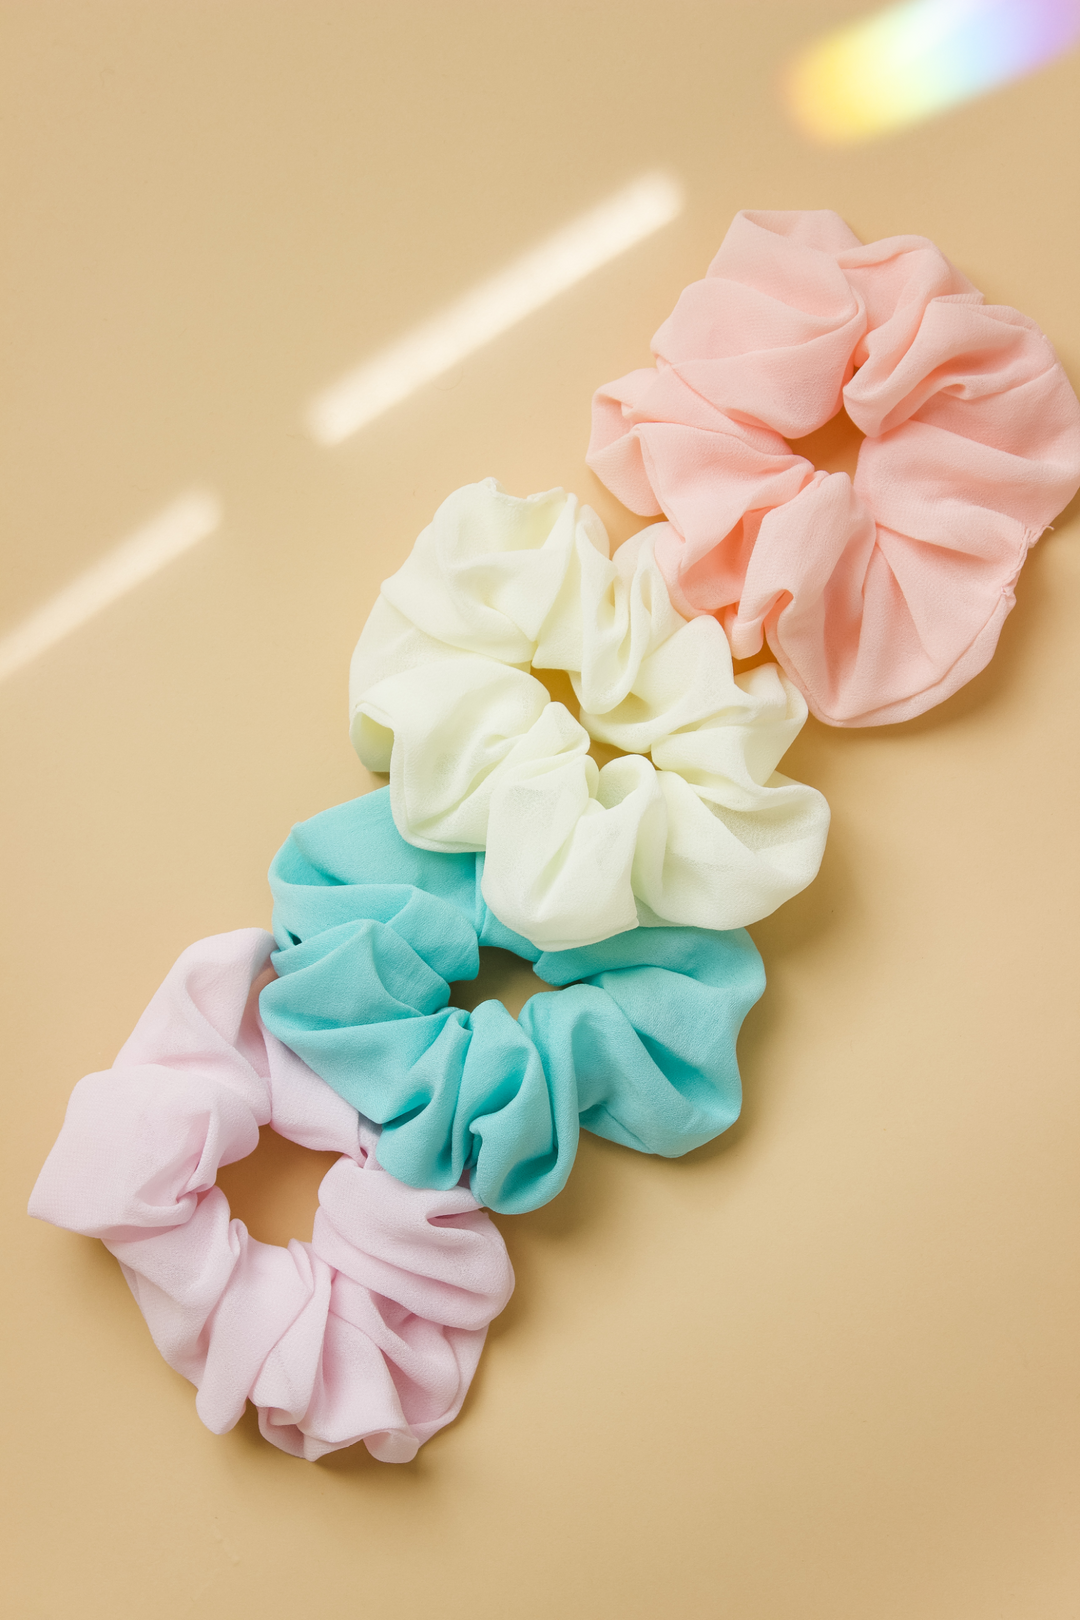 Line up of pastel colored chiffon scrunchies in peach, pale yellow, aqua, and light purple